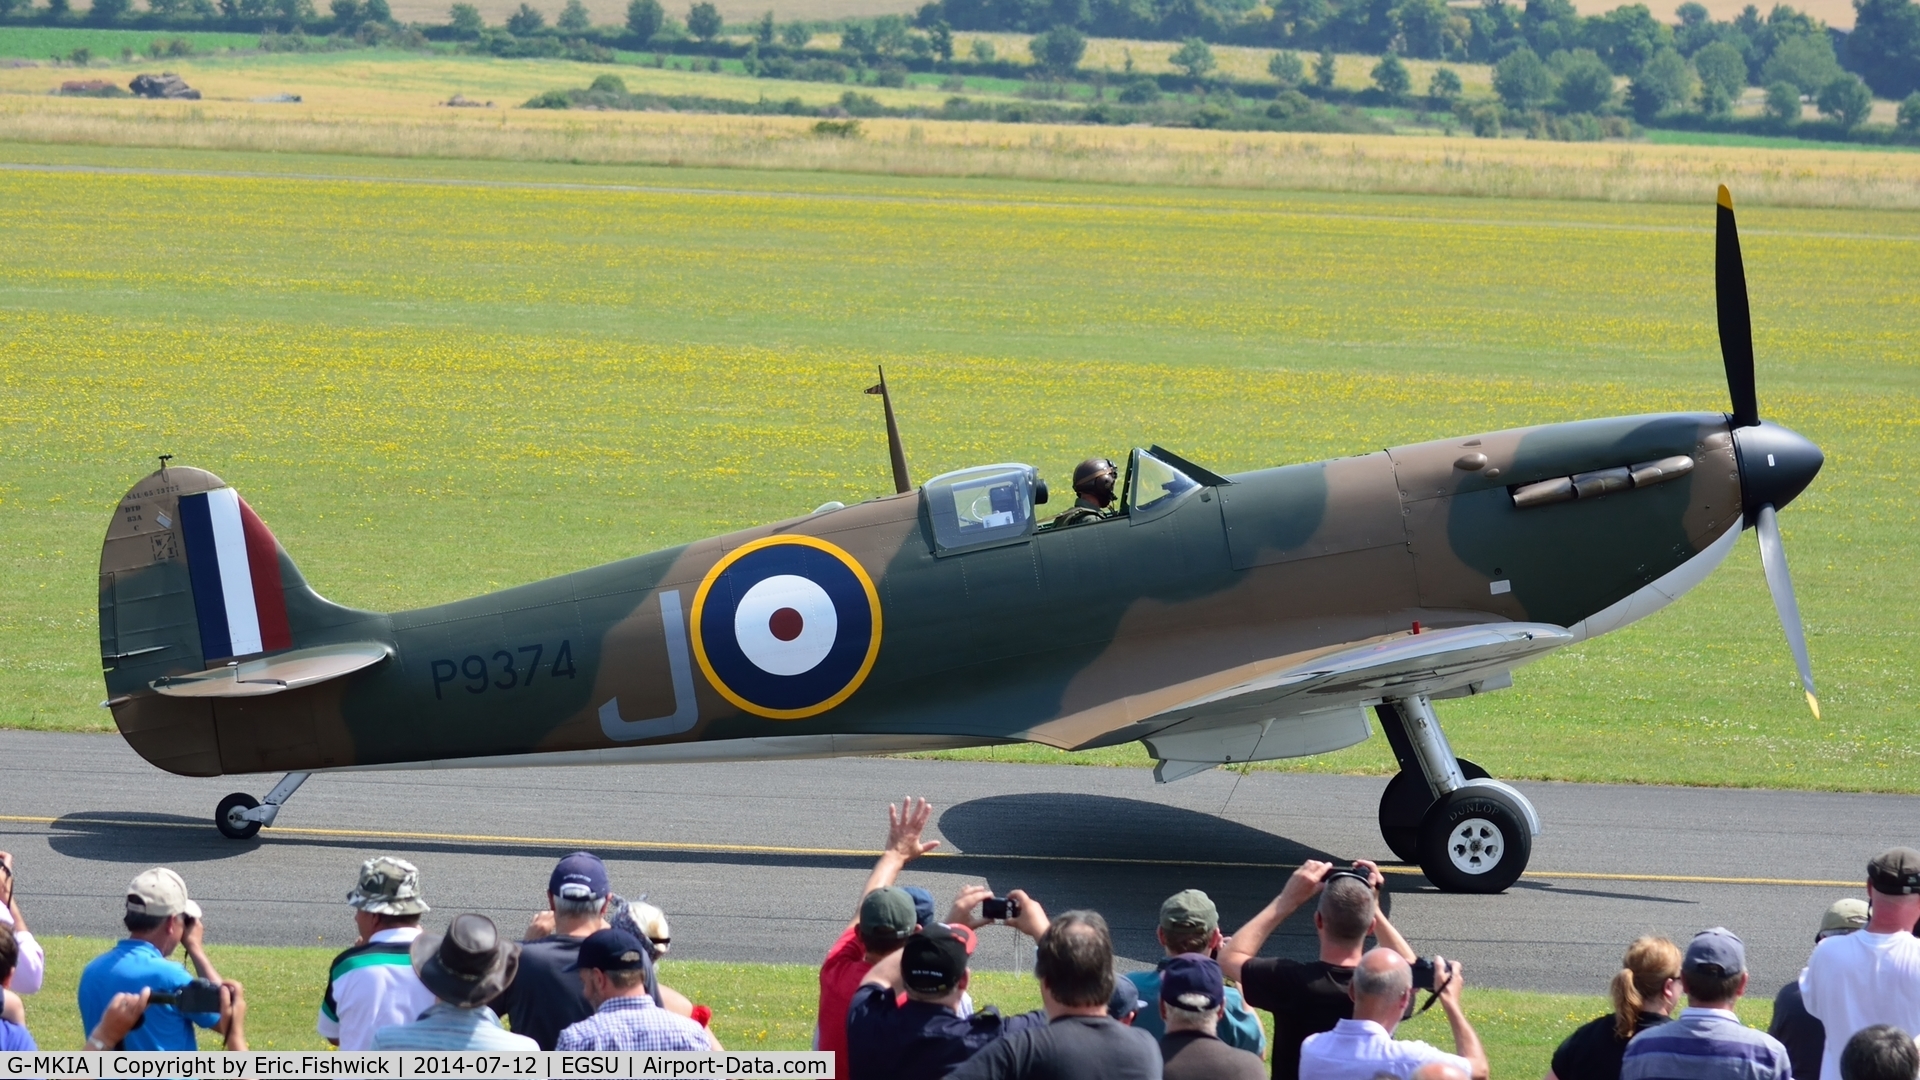 G-MKIA, 1939 Supermarine 300 Spitfire Mk1A C/N 6S/30565, 5. P9374 at The Flying Legends Air Show, IWM Duxford. July,2014.